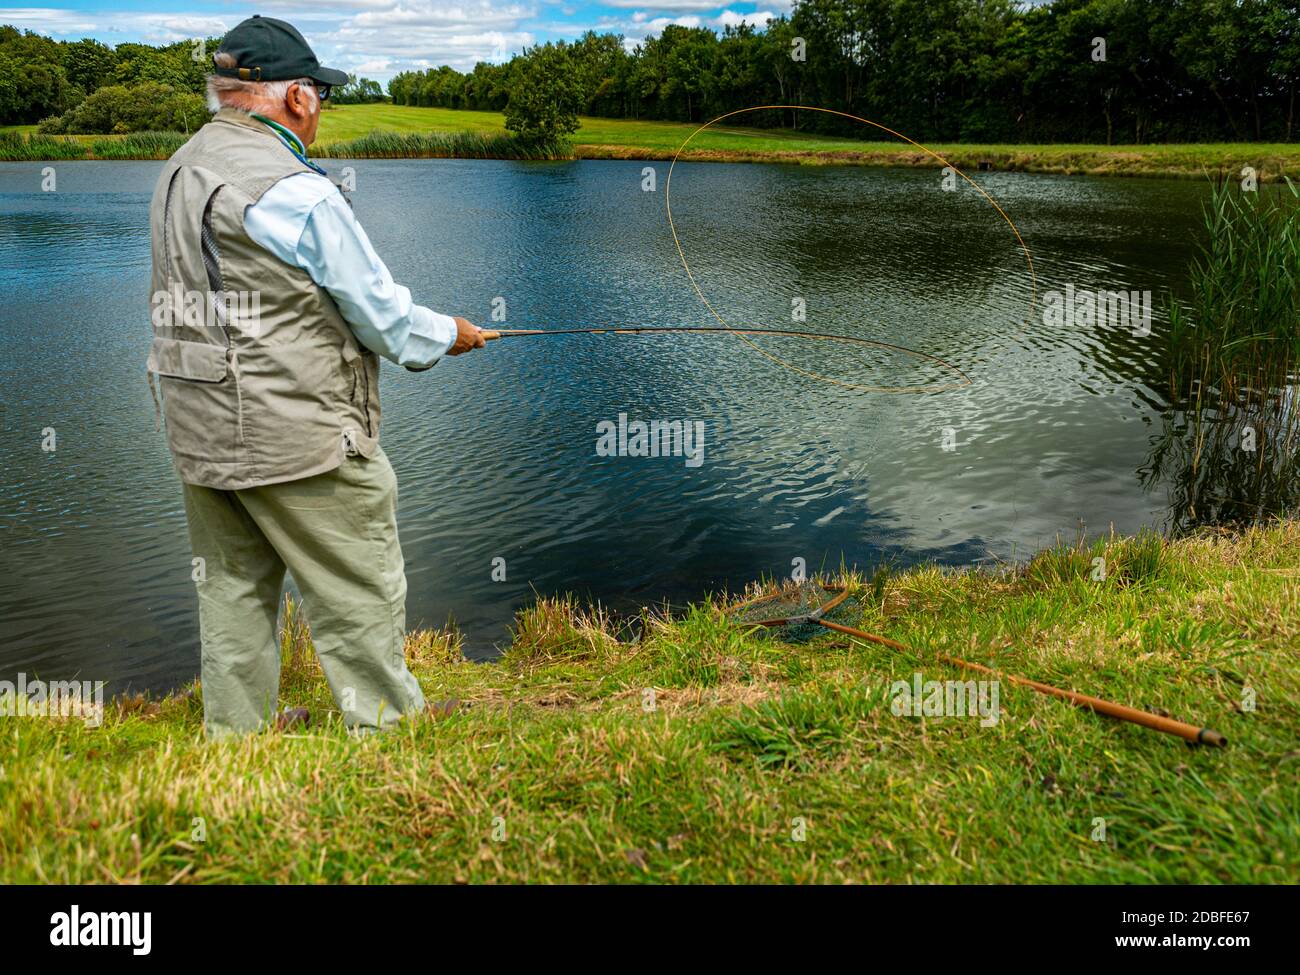 Lincolnshire, UK - Mr Barry Grantham, an instructor in fly fishing, casting a fly line across a trout lake for rainbow trout Stock Photo